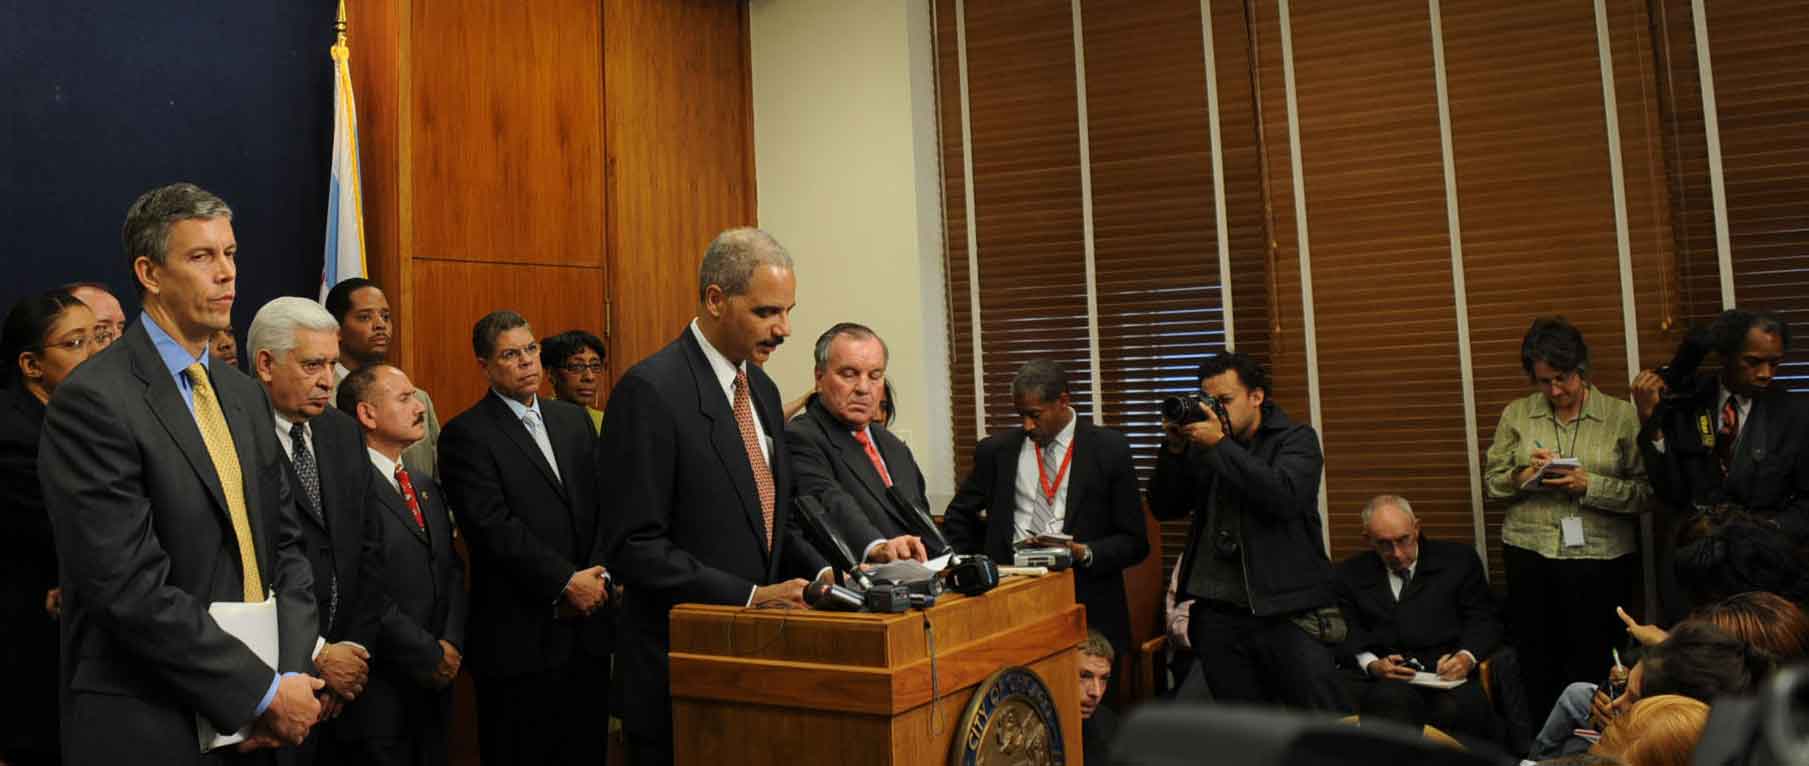 U.S. Attorney General Eric Holder (above, at podium) spoke carefully regarding the brutal murder of Fenger High School student Derrion Albert and 'youth violence' in general during the heavily attended press conference at Chicago's City Hall on October 7, 2009. Holder was one of three individuals who spoke and answered questions from the nearly 100 reporters and camera crews from around the world that jammed into the stuffy room for the media event. The other two were U.S. Secretary of Education Arne Duncan (second from left, above) and Chicago Mayor Richard M. Daley (to the right of Holder, above). Substance photo by George N. Schmidt.